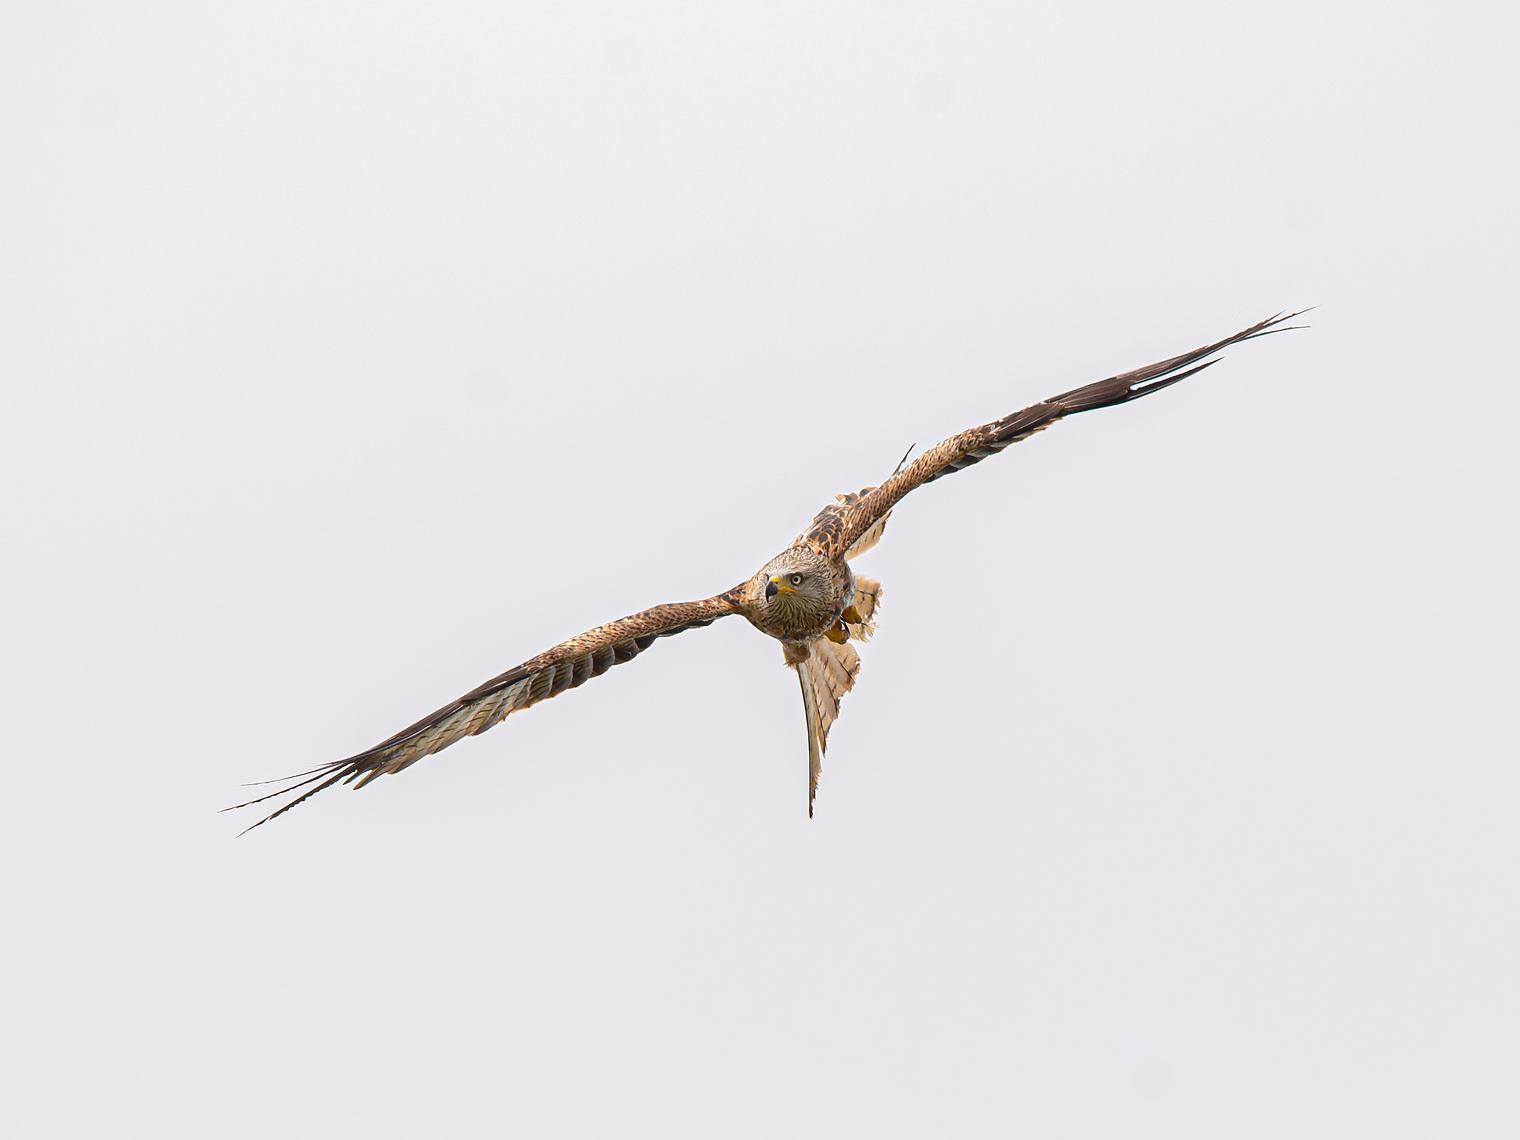 A red kite, captured on camera by Cliff Kinch.